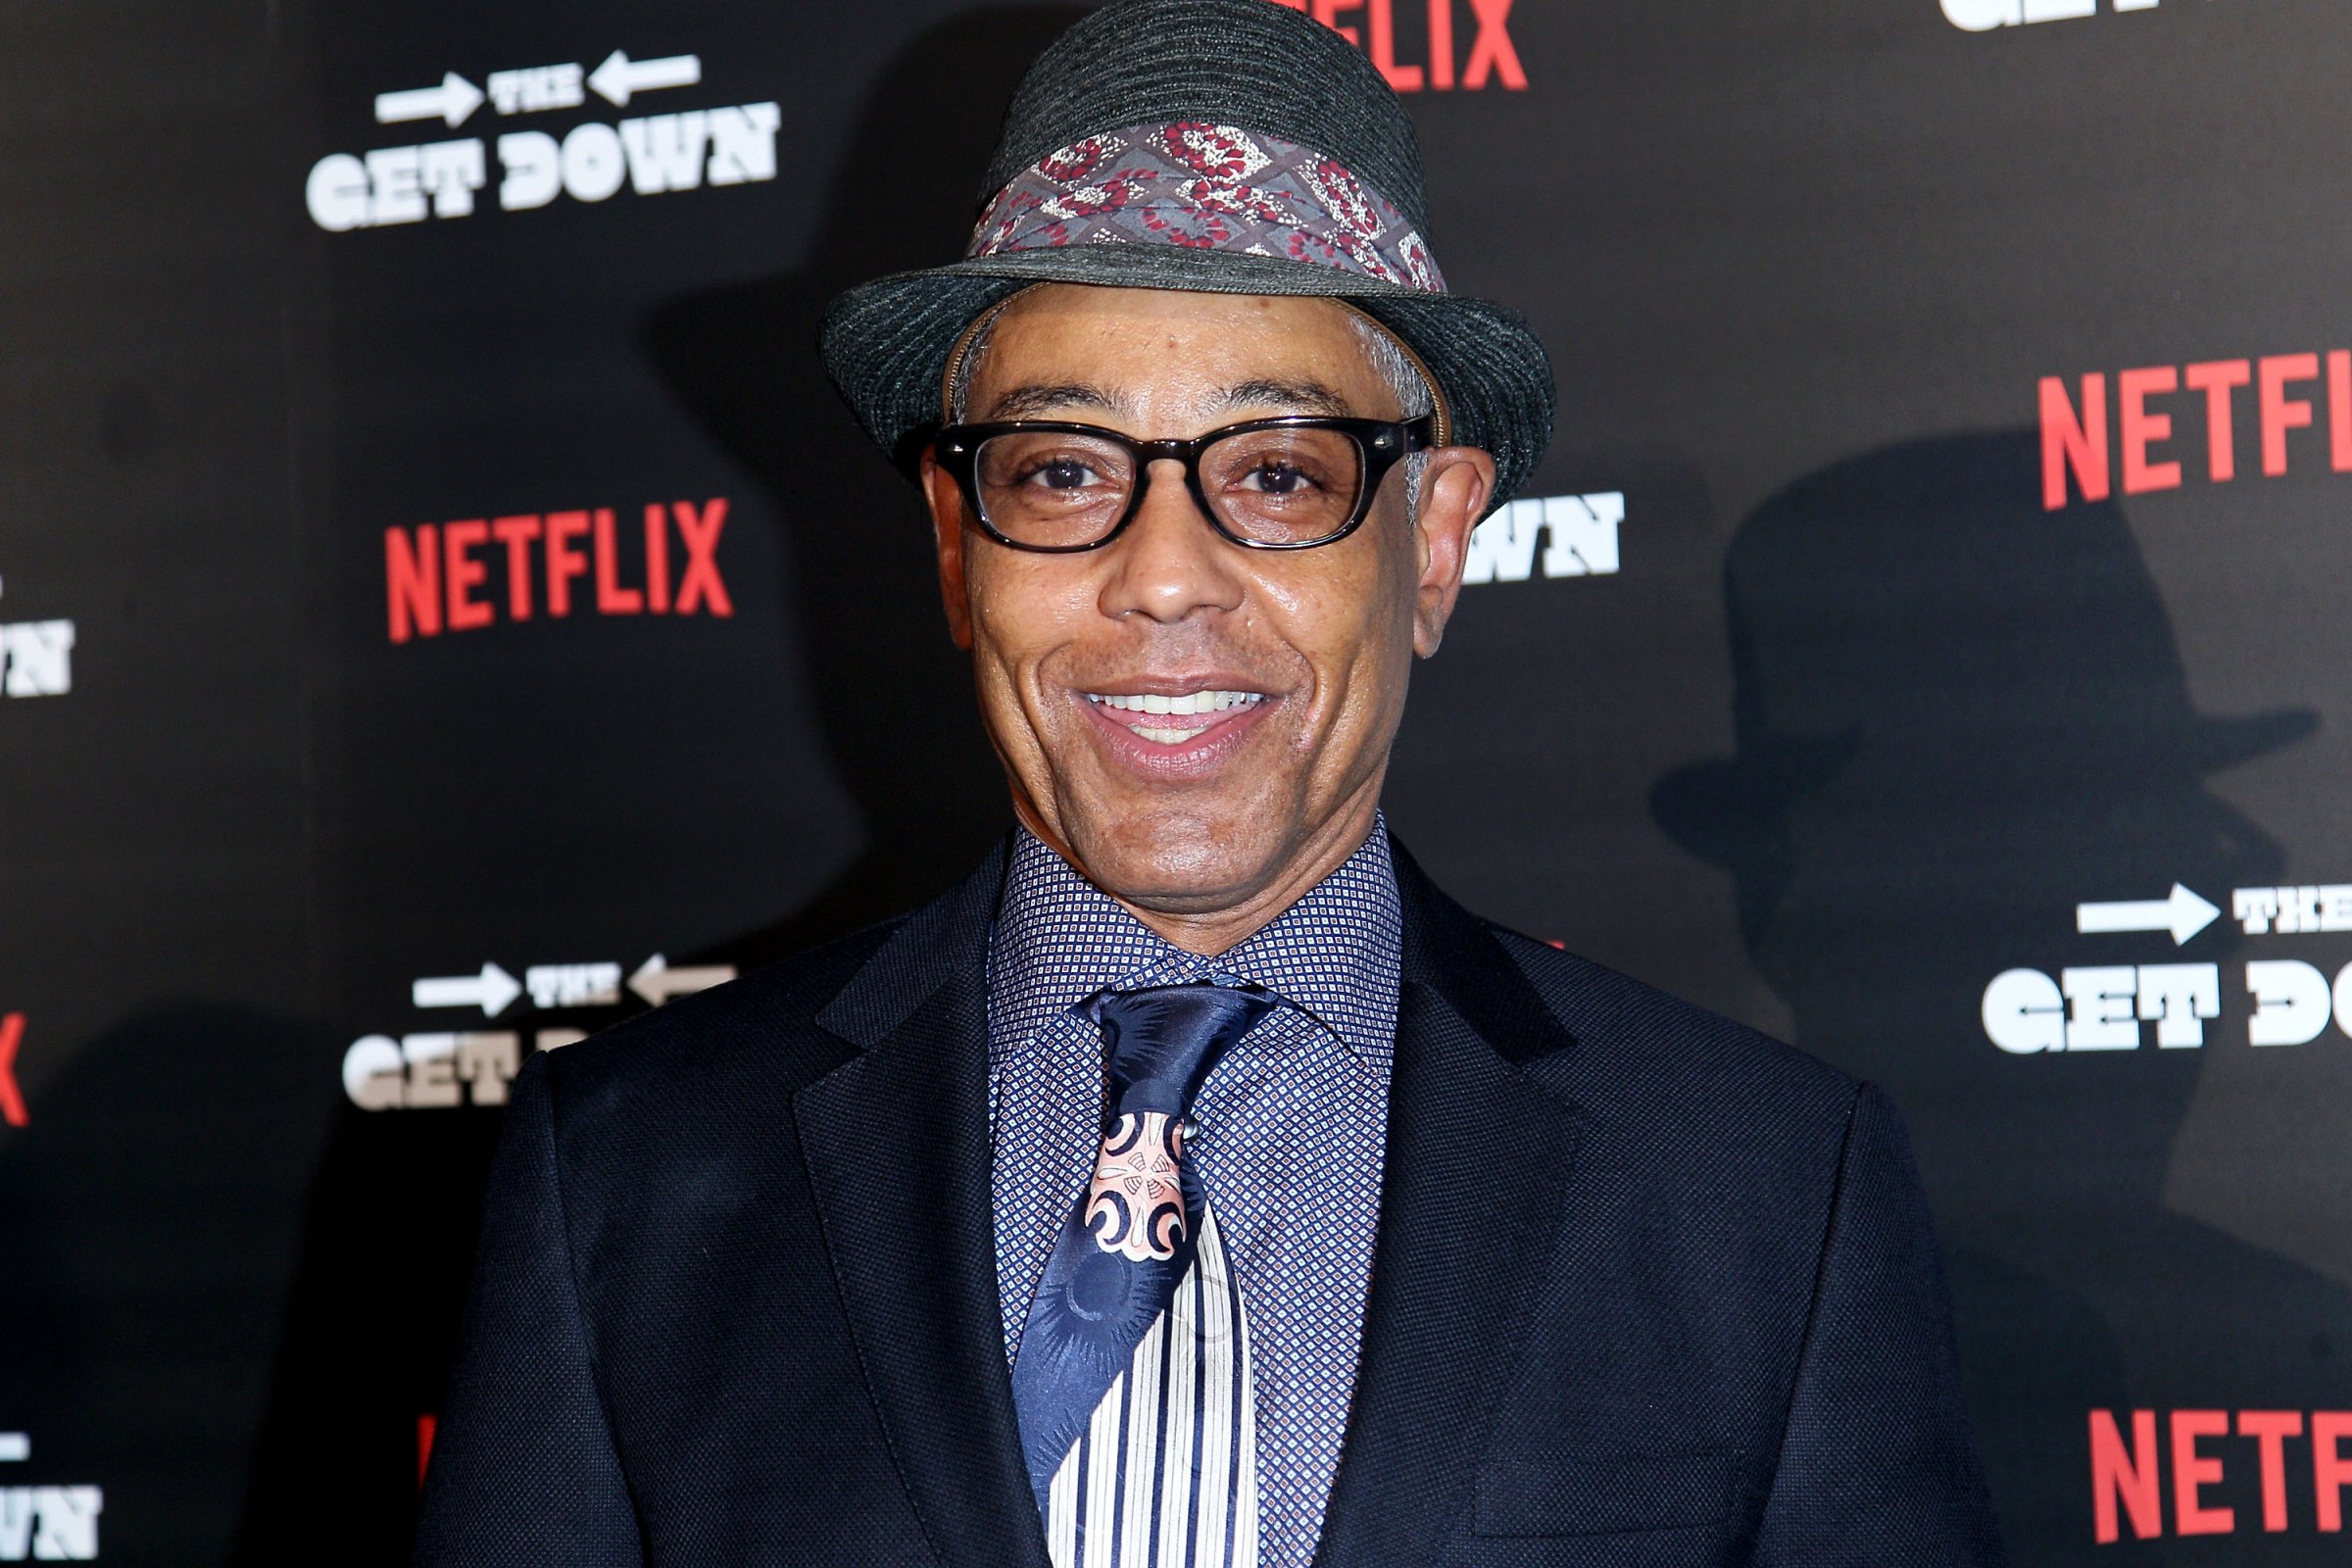 Giancarlo Esposito attends the "The Get Down" New York Premiere at Lehman Center For The Performing Arts on August 11, 2016 in New York City.